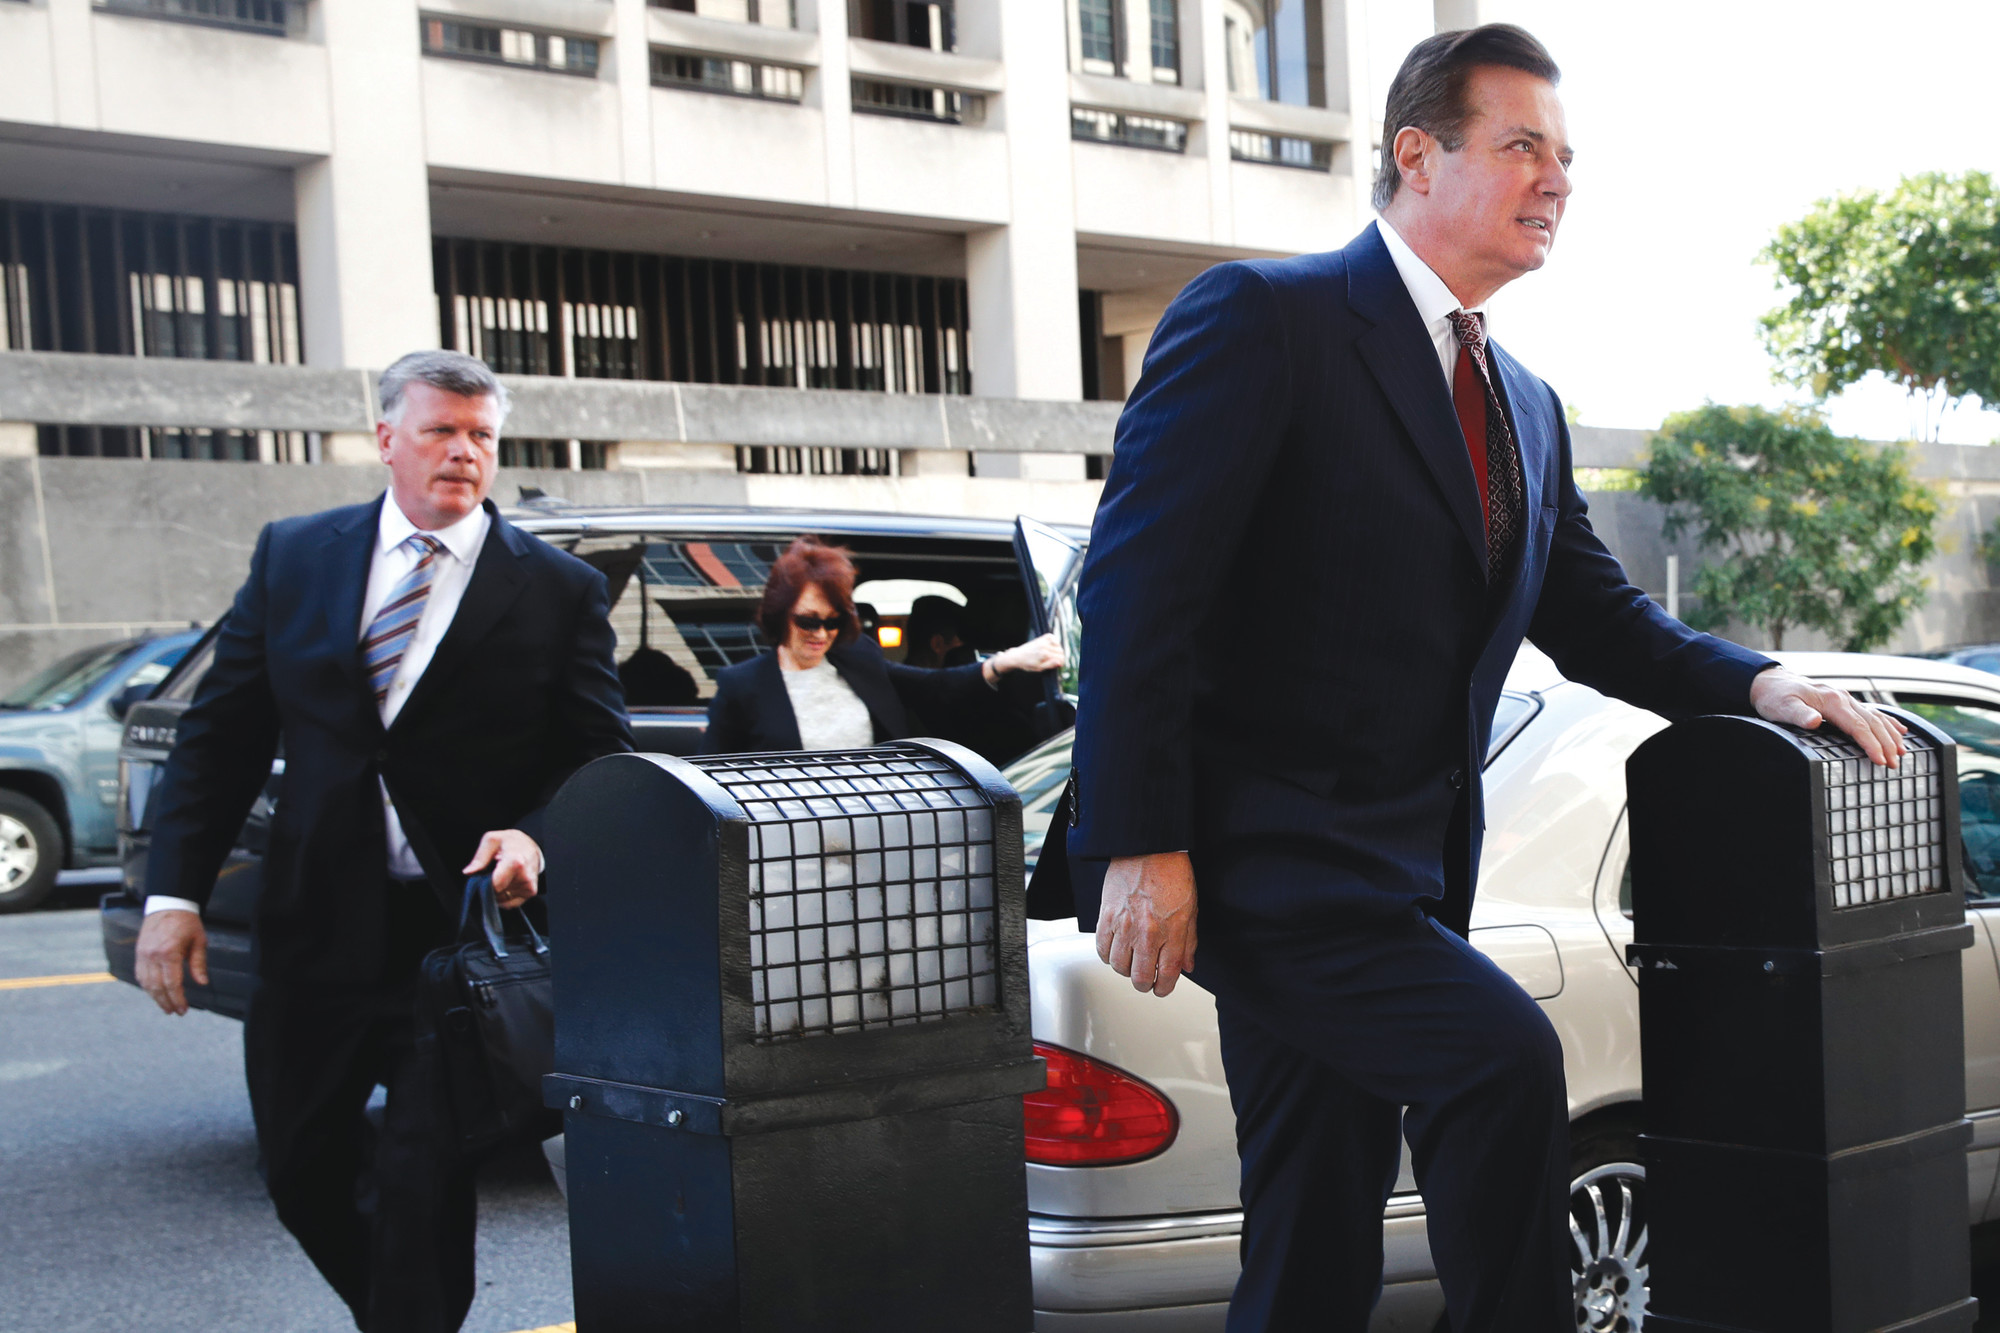 Paul Manafort, right, arrives at federal court accompanied by his lawyer Kevin Downing, left, and wife, Kathleen Manafort, on June 15 in Washington.